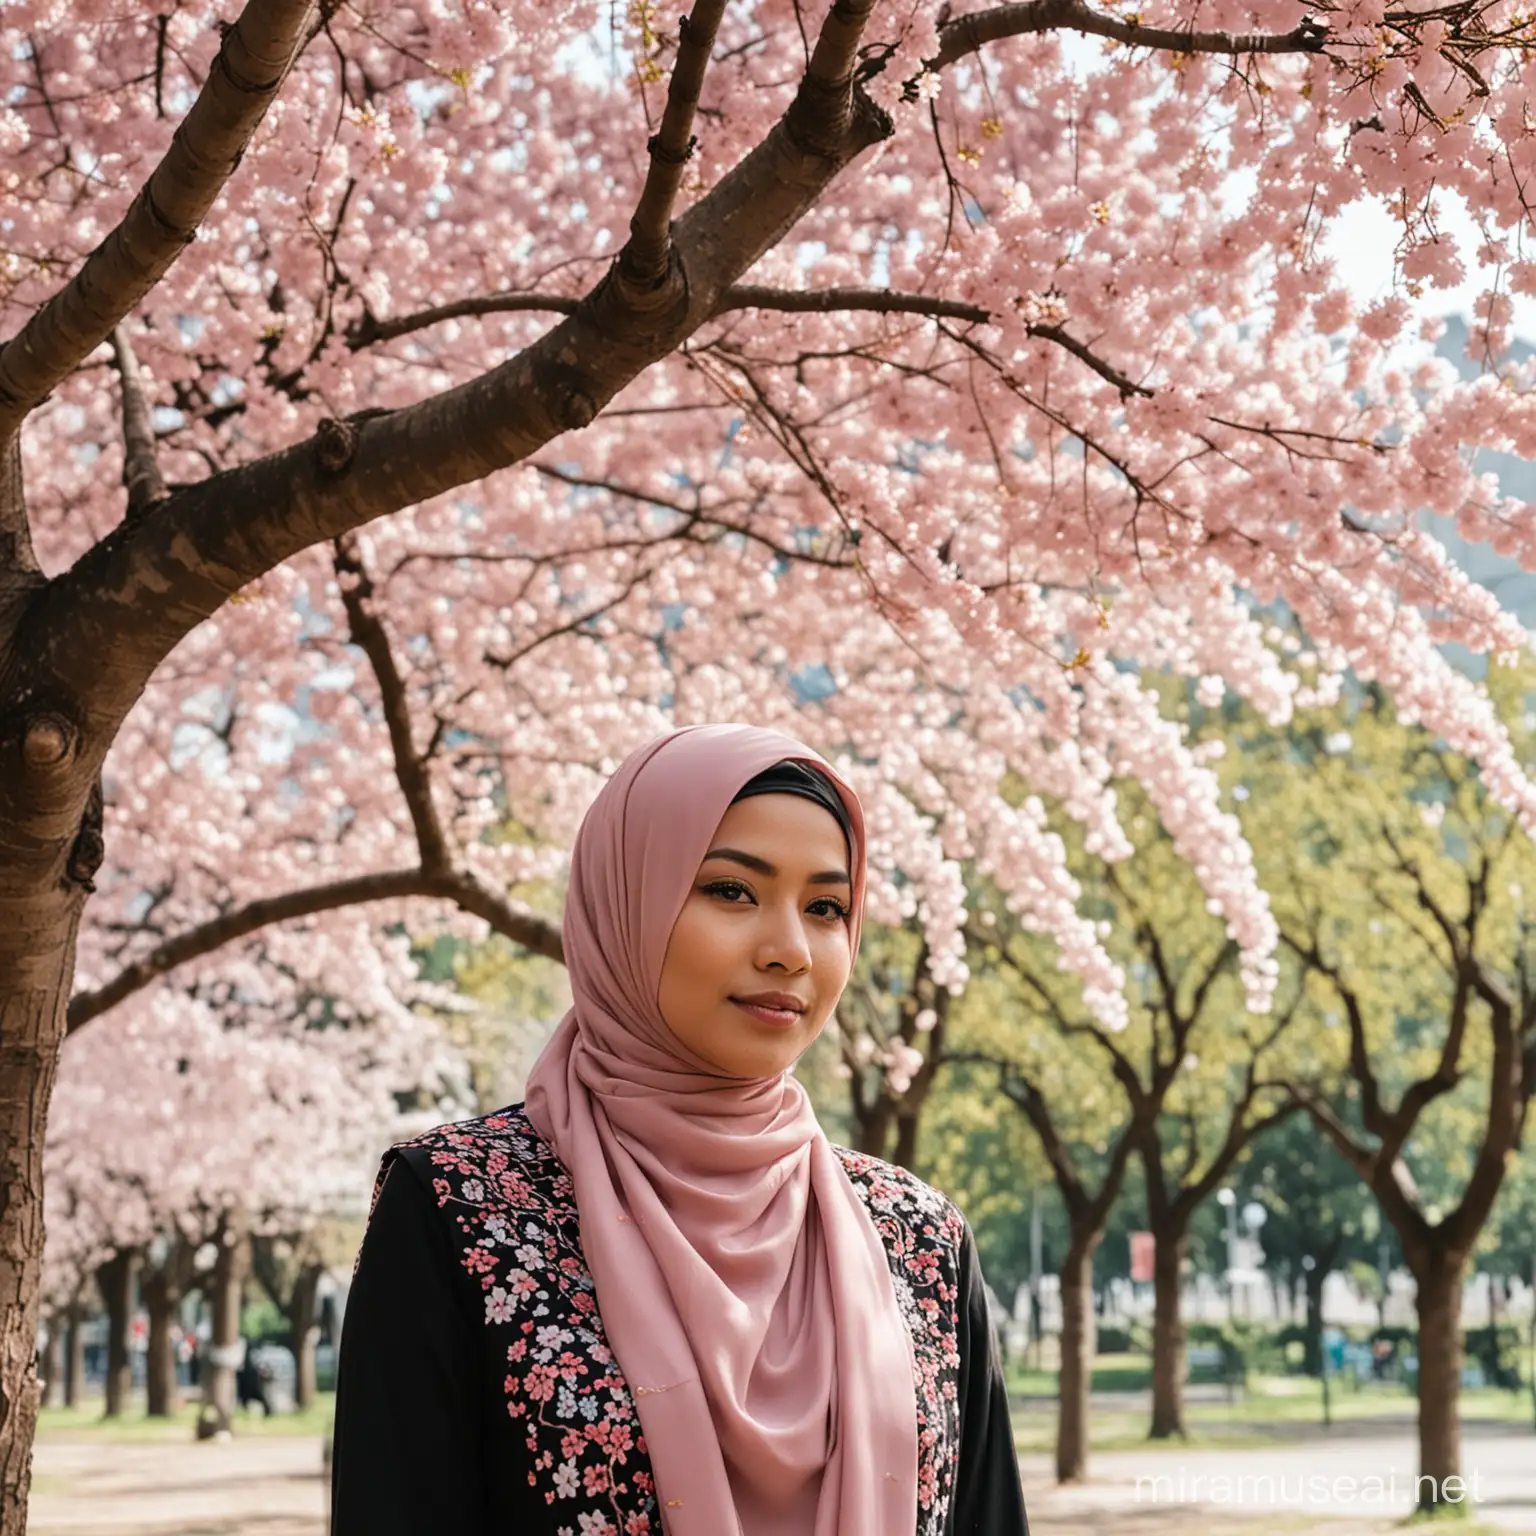 An Indonesian woman wearing a hijab is standing under a tree decorated with cherry blossoms.